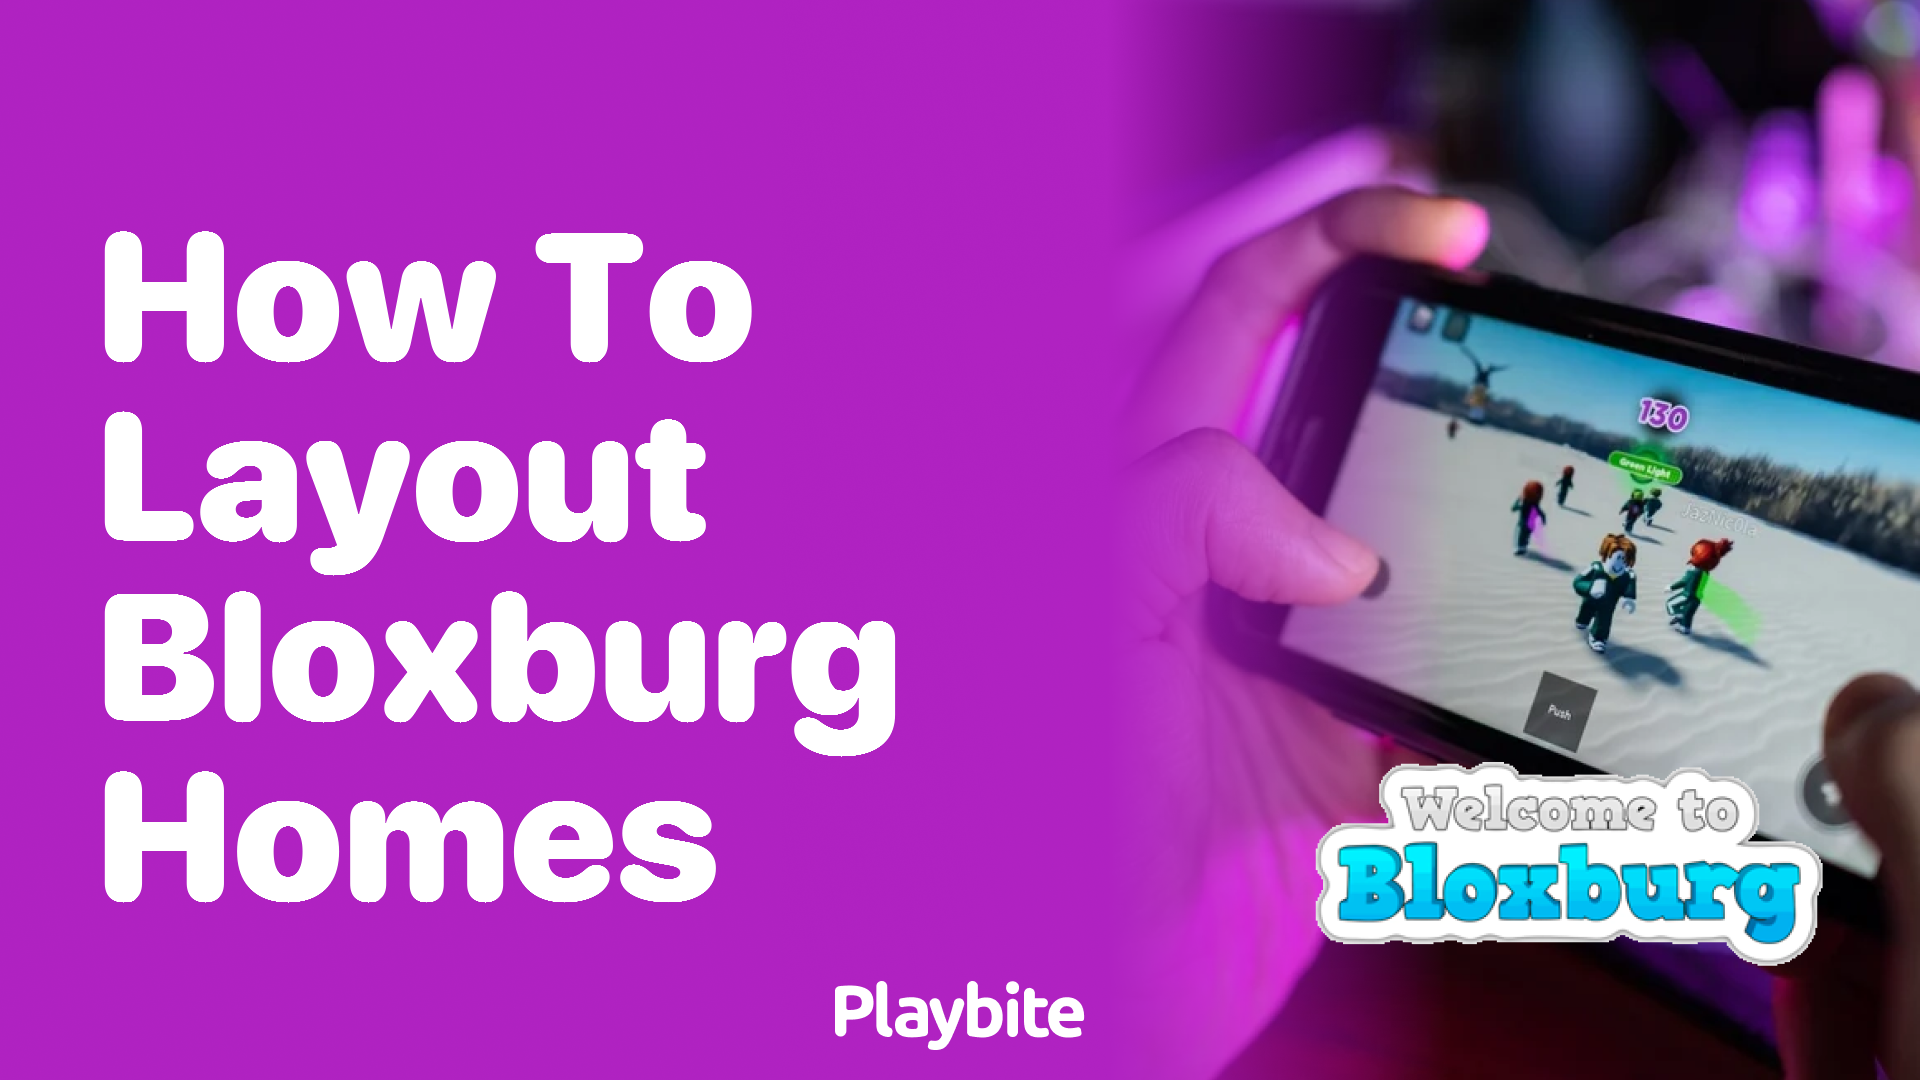 How to Layout Bloxburg Homes